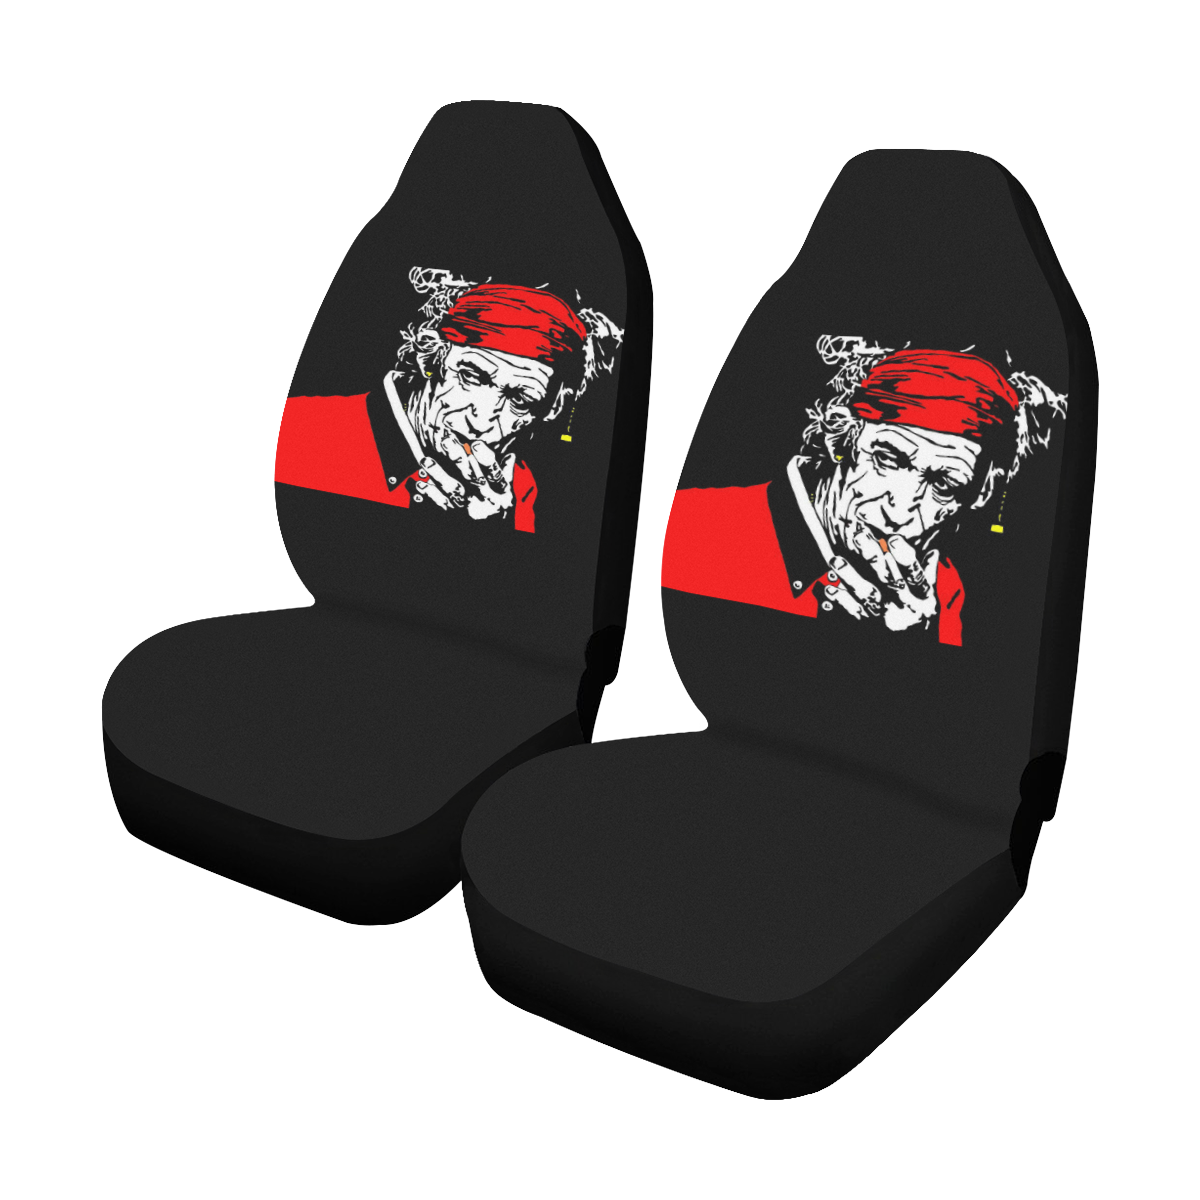 KEITH RICHARDS- Car Seat Covers (Set of 2)